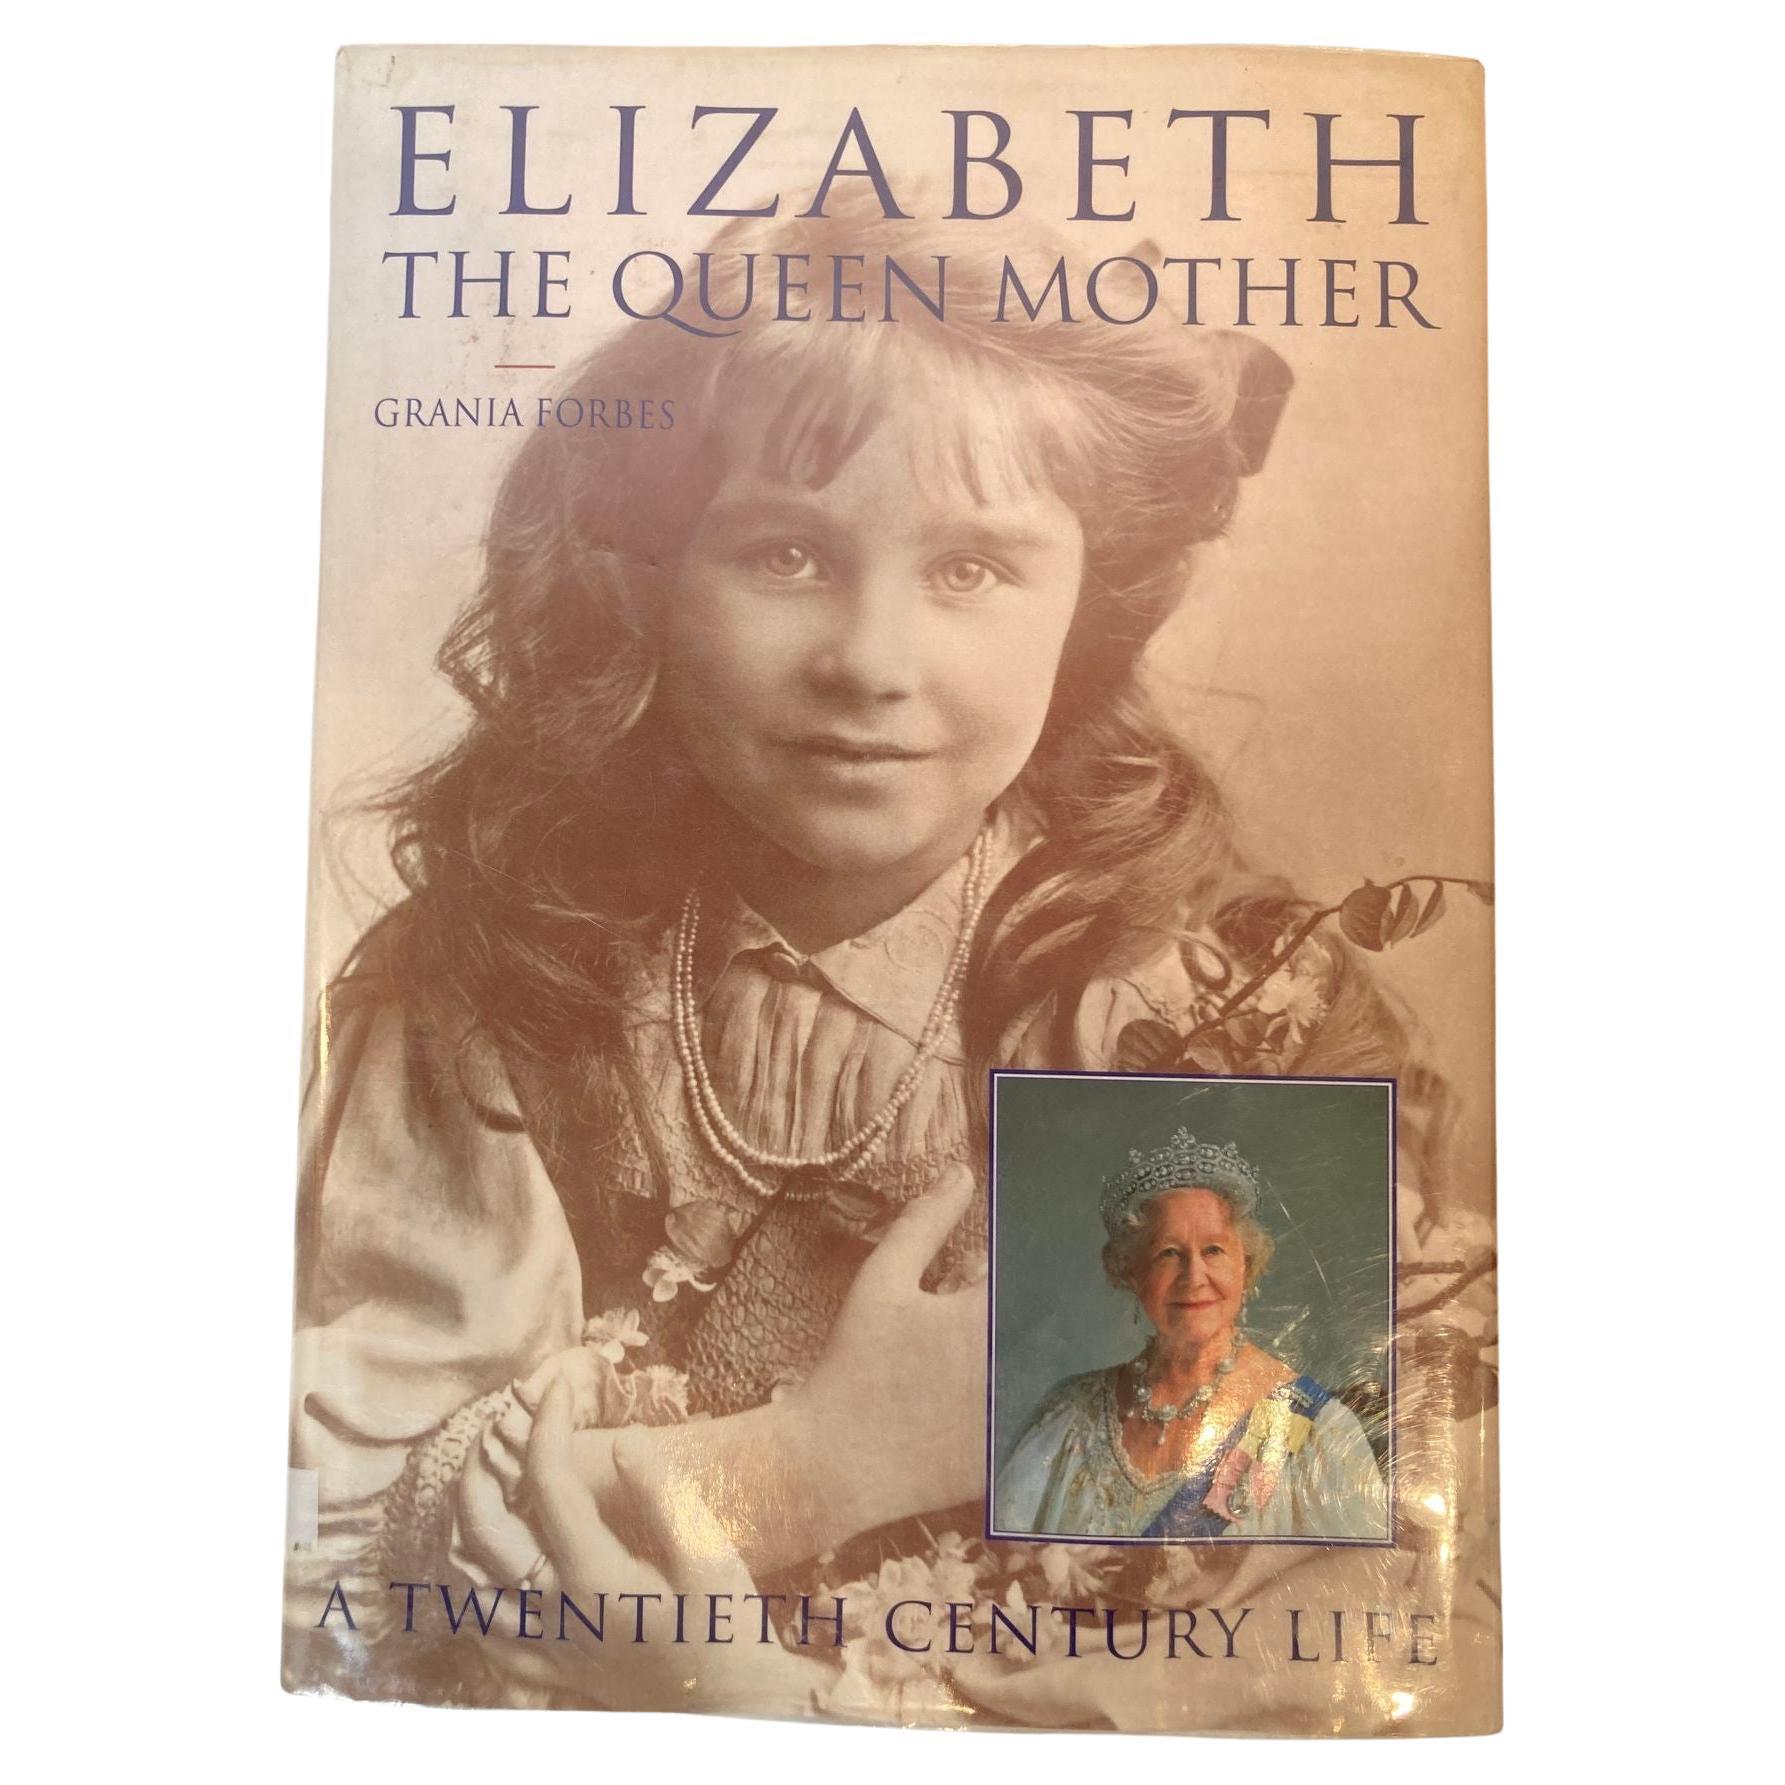 Elizabeth the Queen Mother : a Twentieth Century Life by Grania Forbes Hardcover For Sale